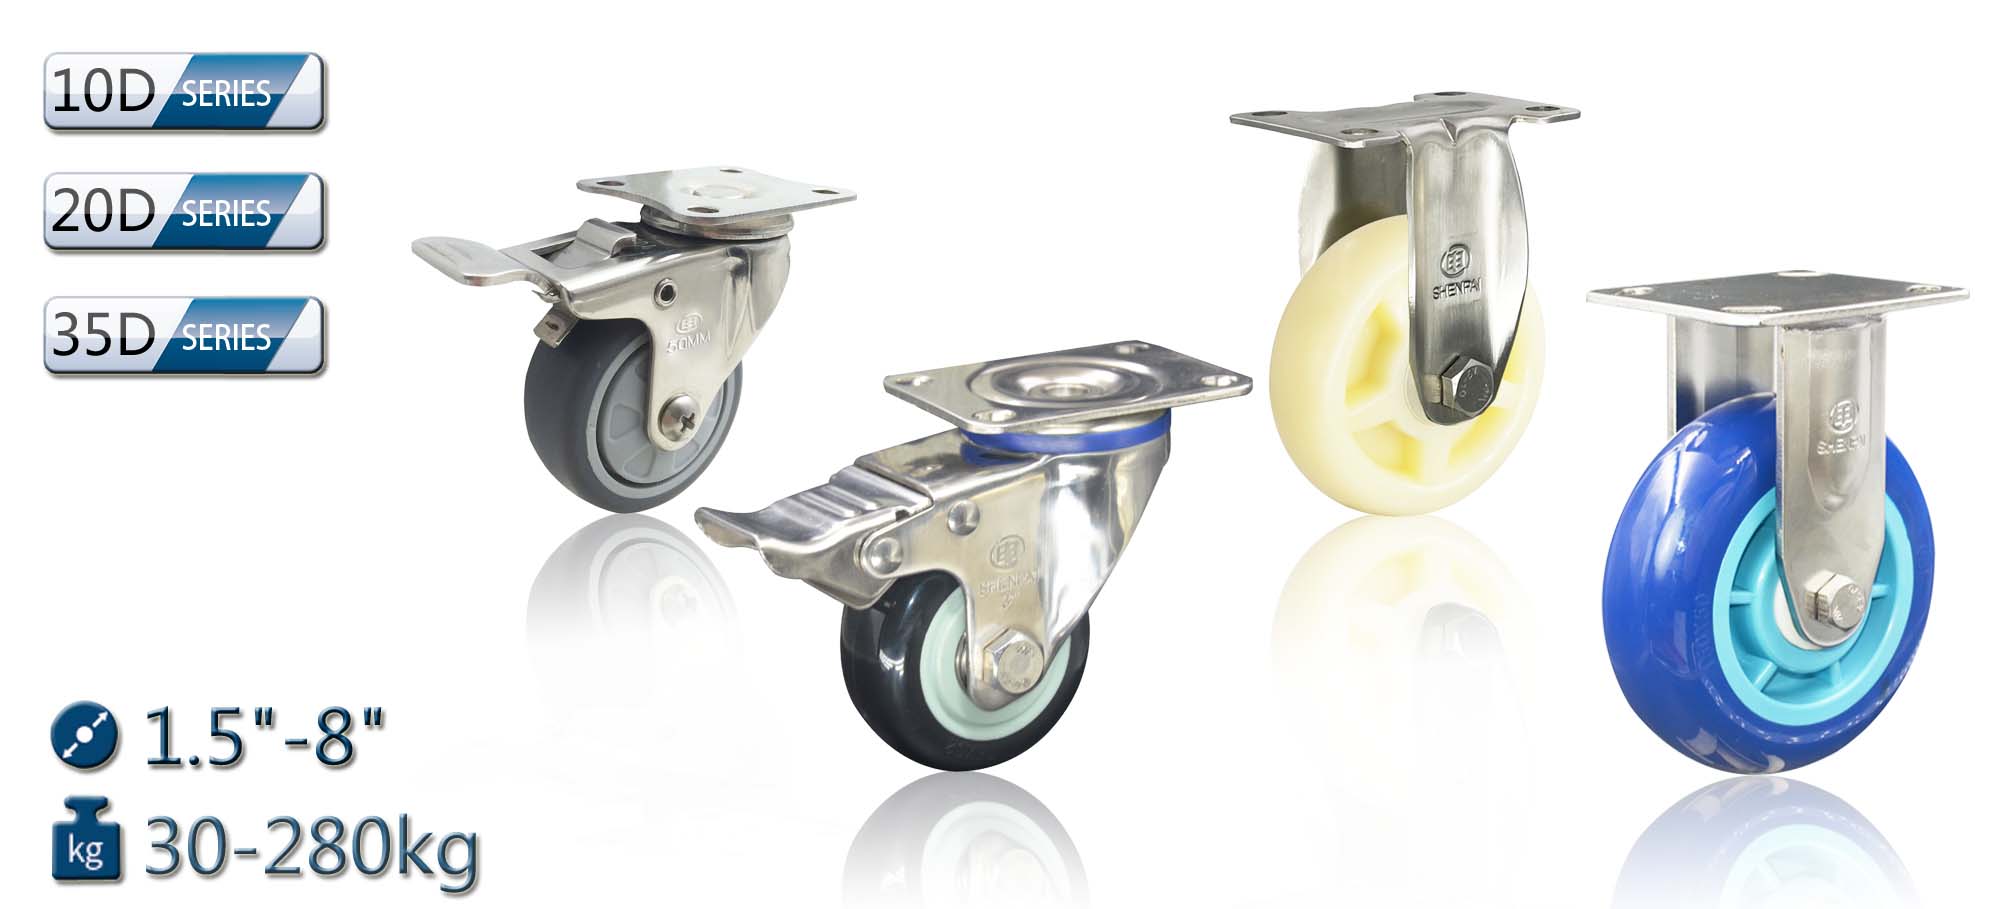 Stainless Steel Caster Series